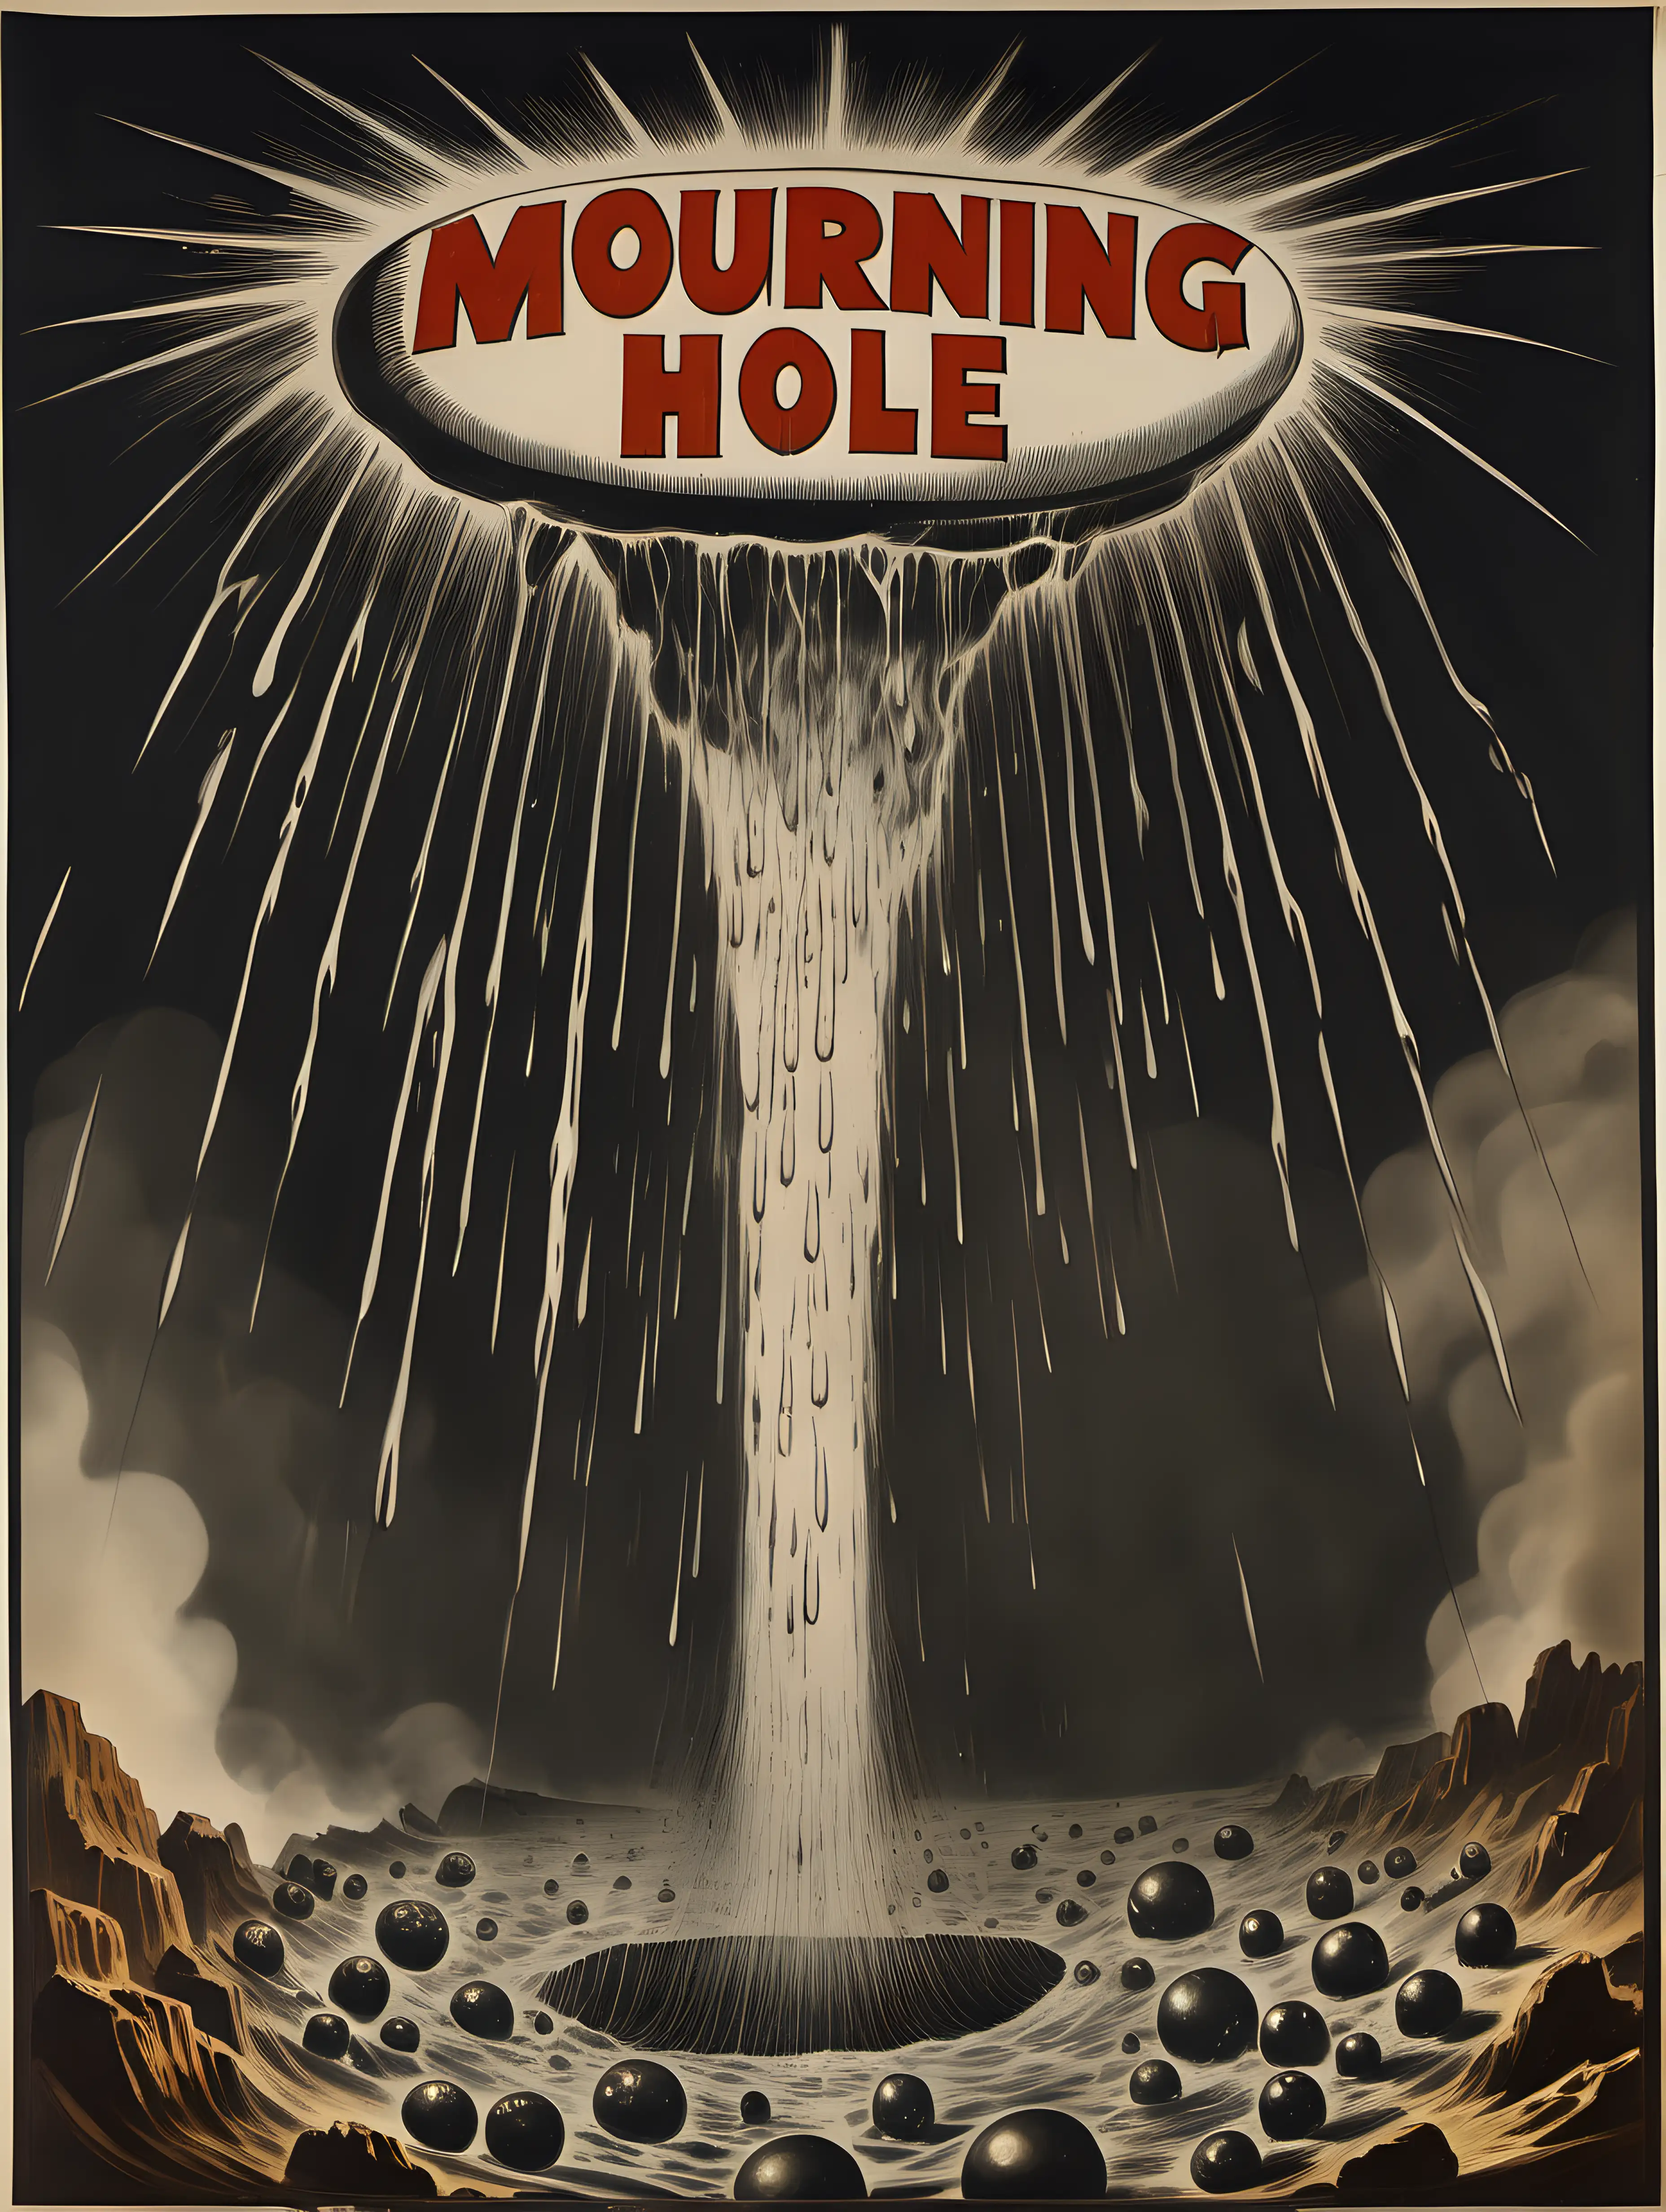 ancient hand painted protest poster, dripping wet, seven different atomic bombs BLASTS, 1860s look, with the text "MOURNING GLORY HOLE" centred in the image, with search lights and glass shrapnel 